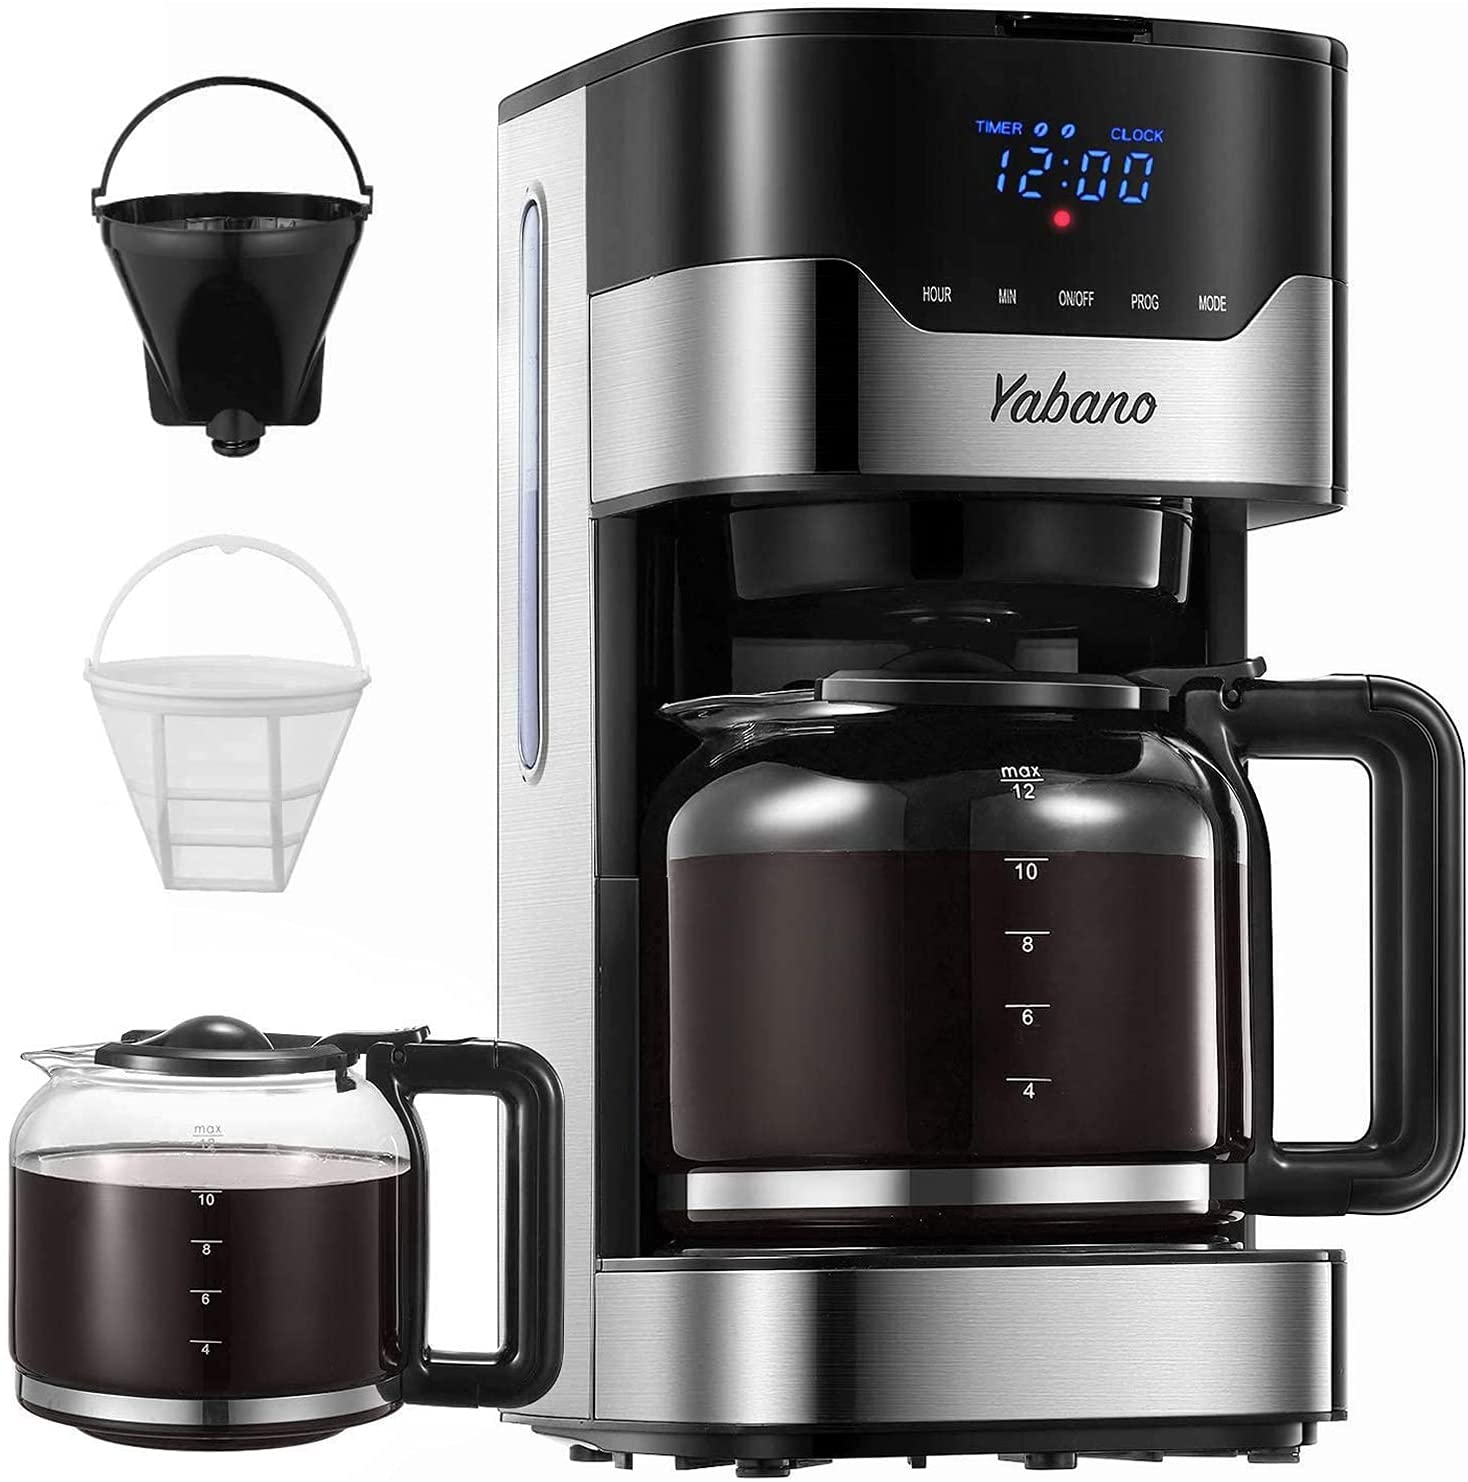 Yabano Filter Coffee Machine Digital with Timer, AromaSelector, Permanent Filter, Touch Screen, 900W, 1.5 L, Stainless Steel